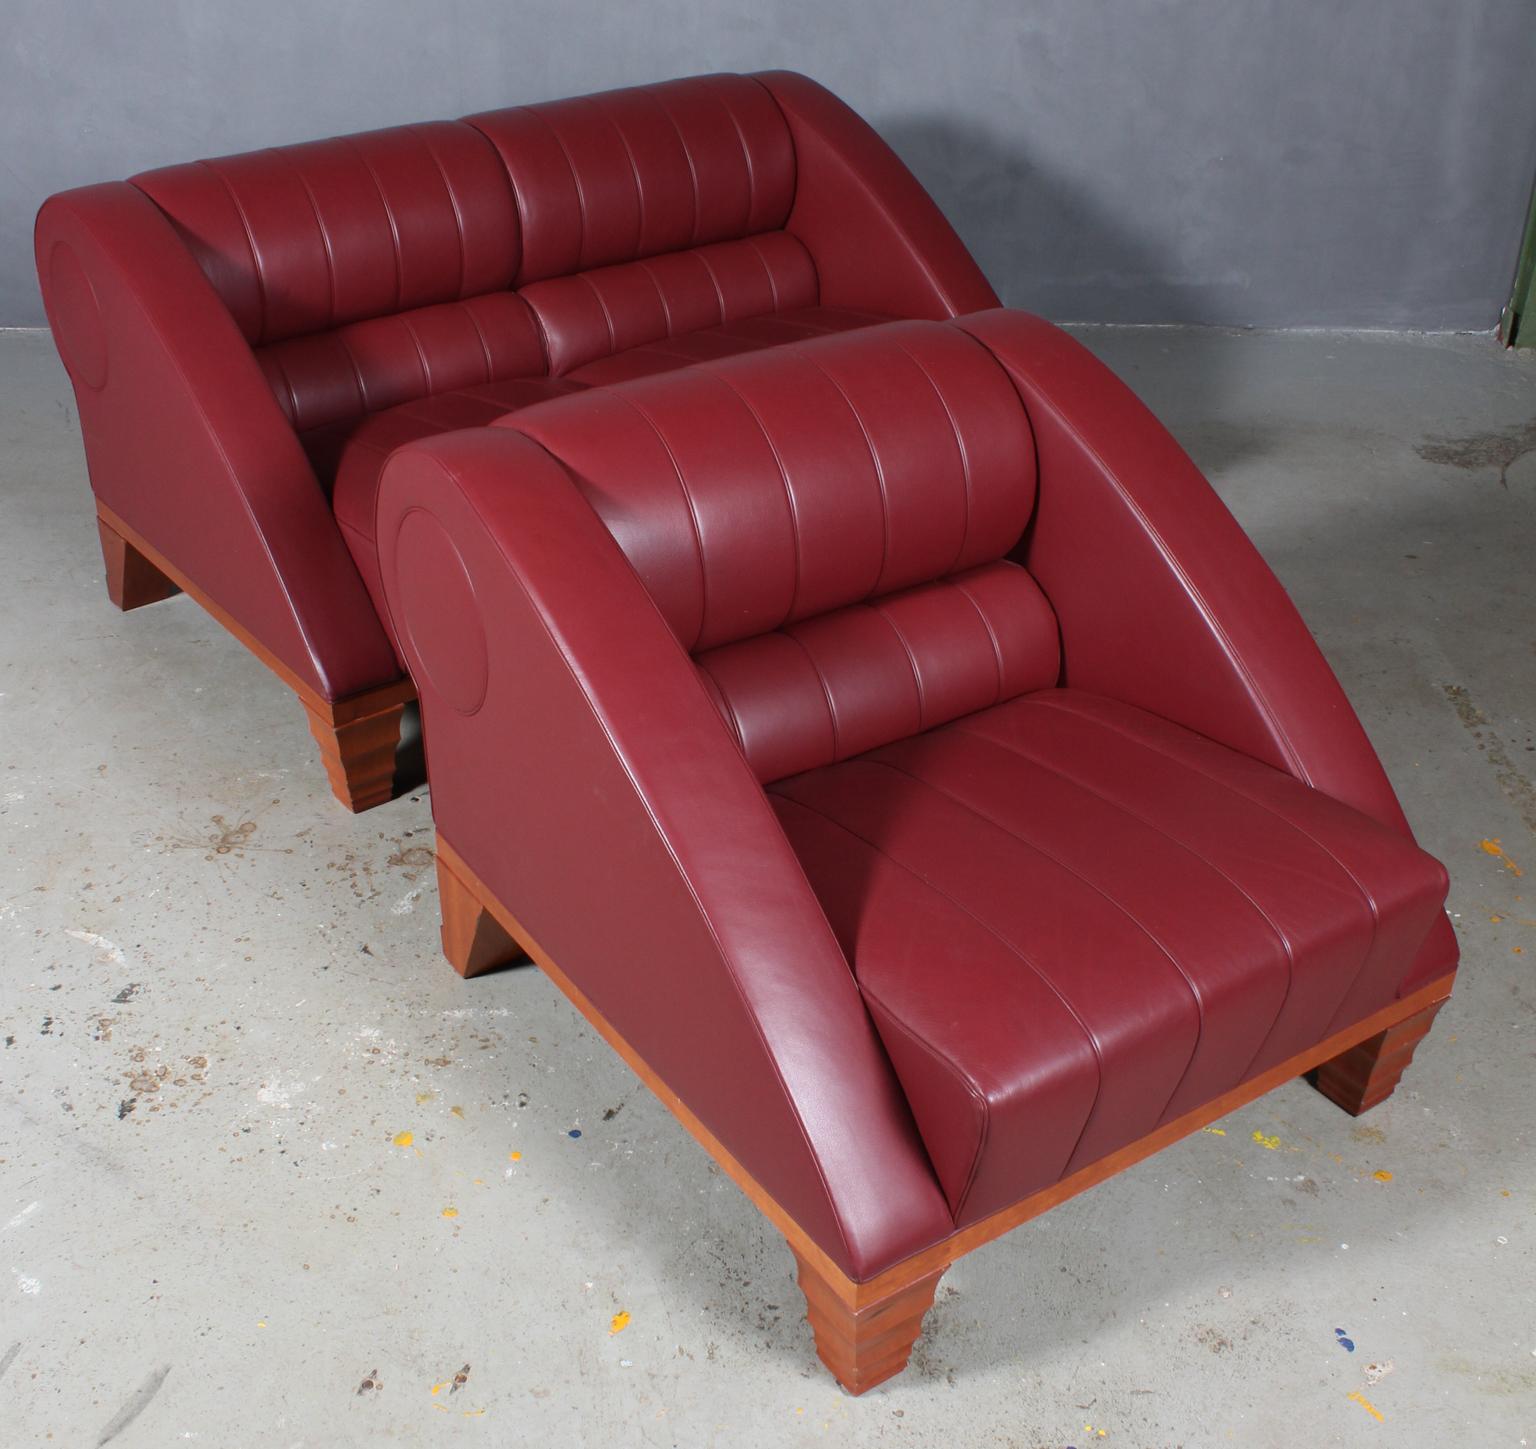 Leon Krier for Giorgetti. Two-seat sofa and lounge chair upholstered with Indian red leather.

Frame of cherry.

Model Aries, made by Giorgetti.